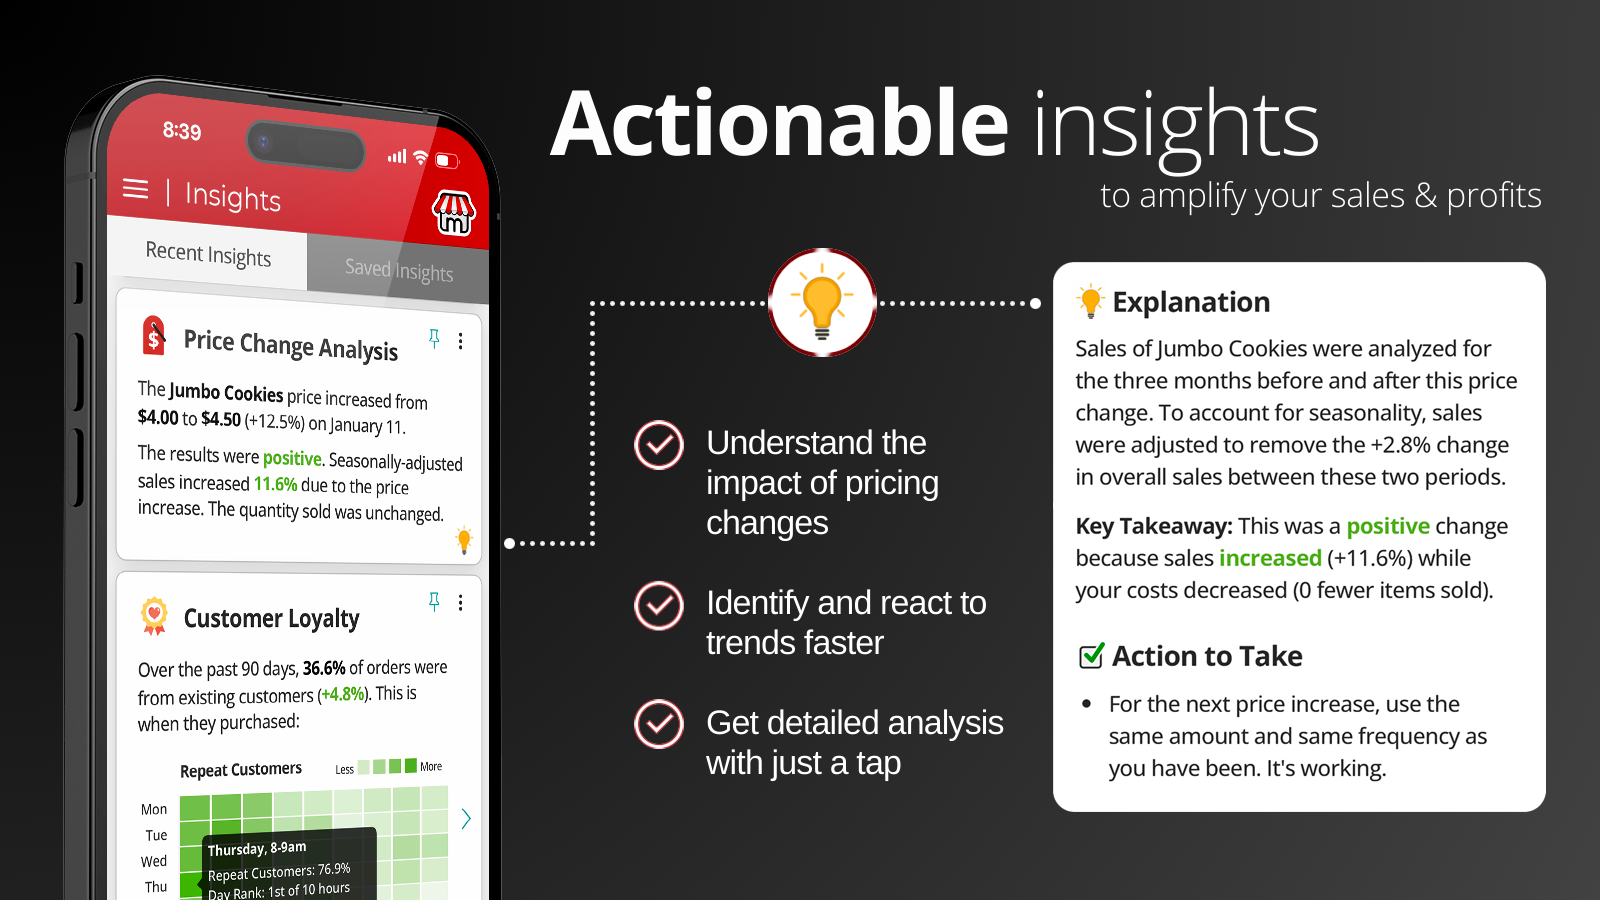 Sprk Actionable Insights